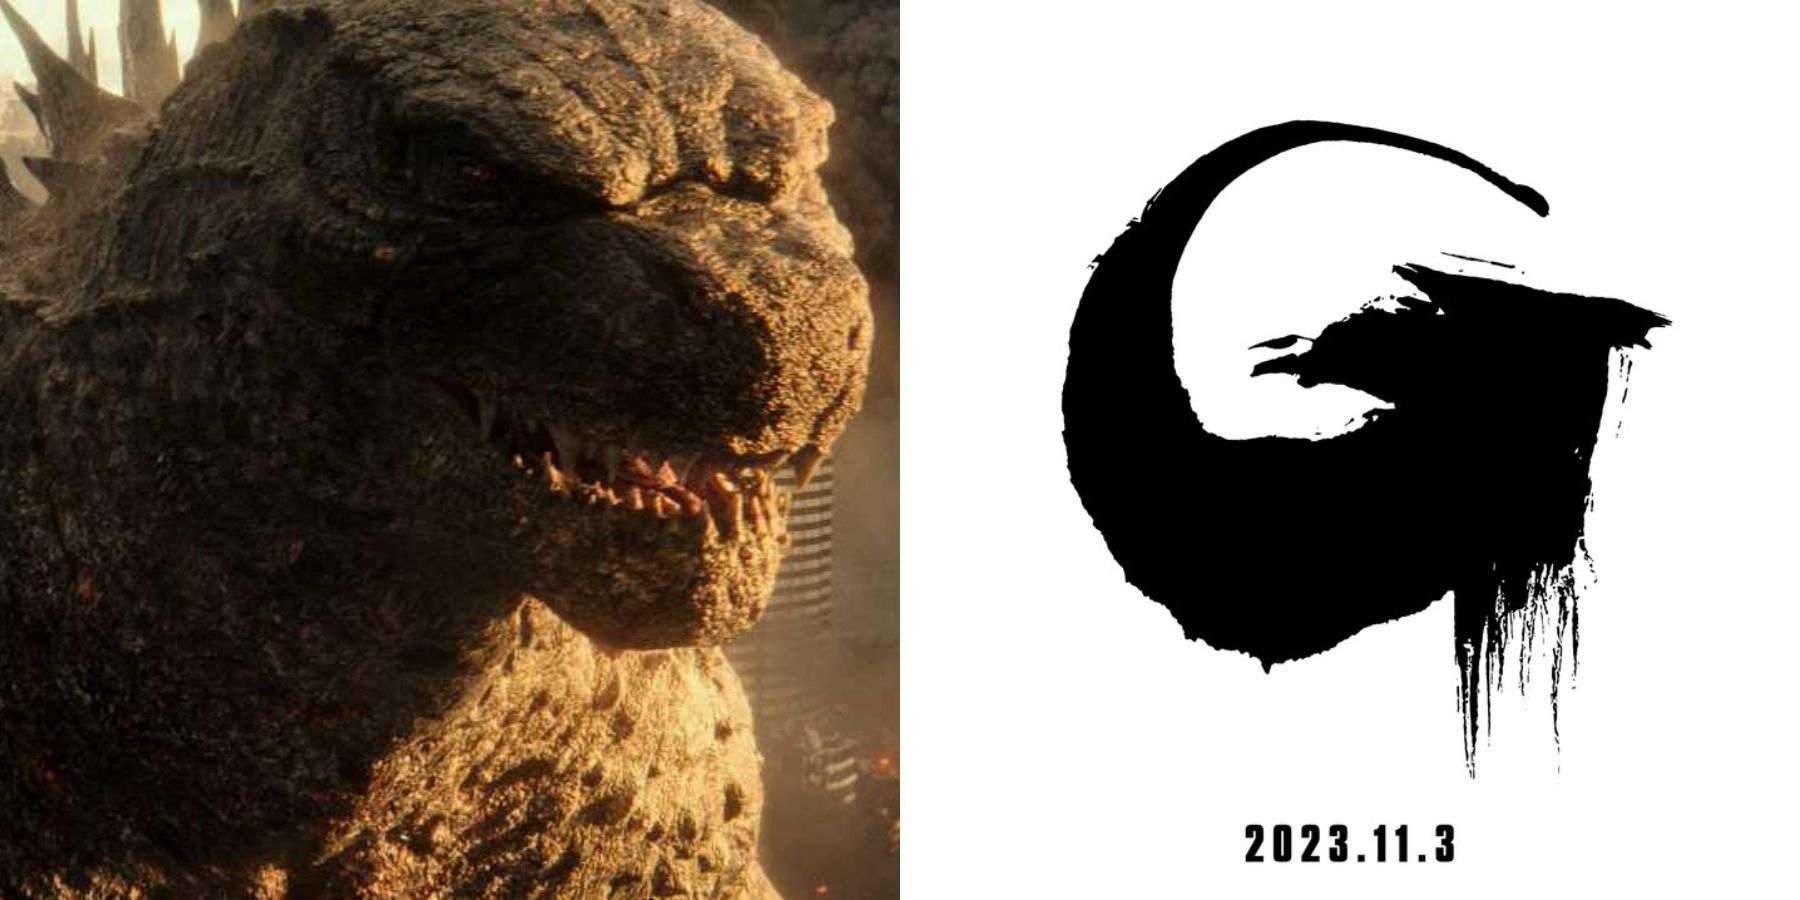 New Godzilla Film Being Released In Theaters By Toho Next Year